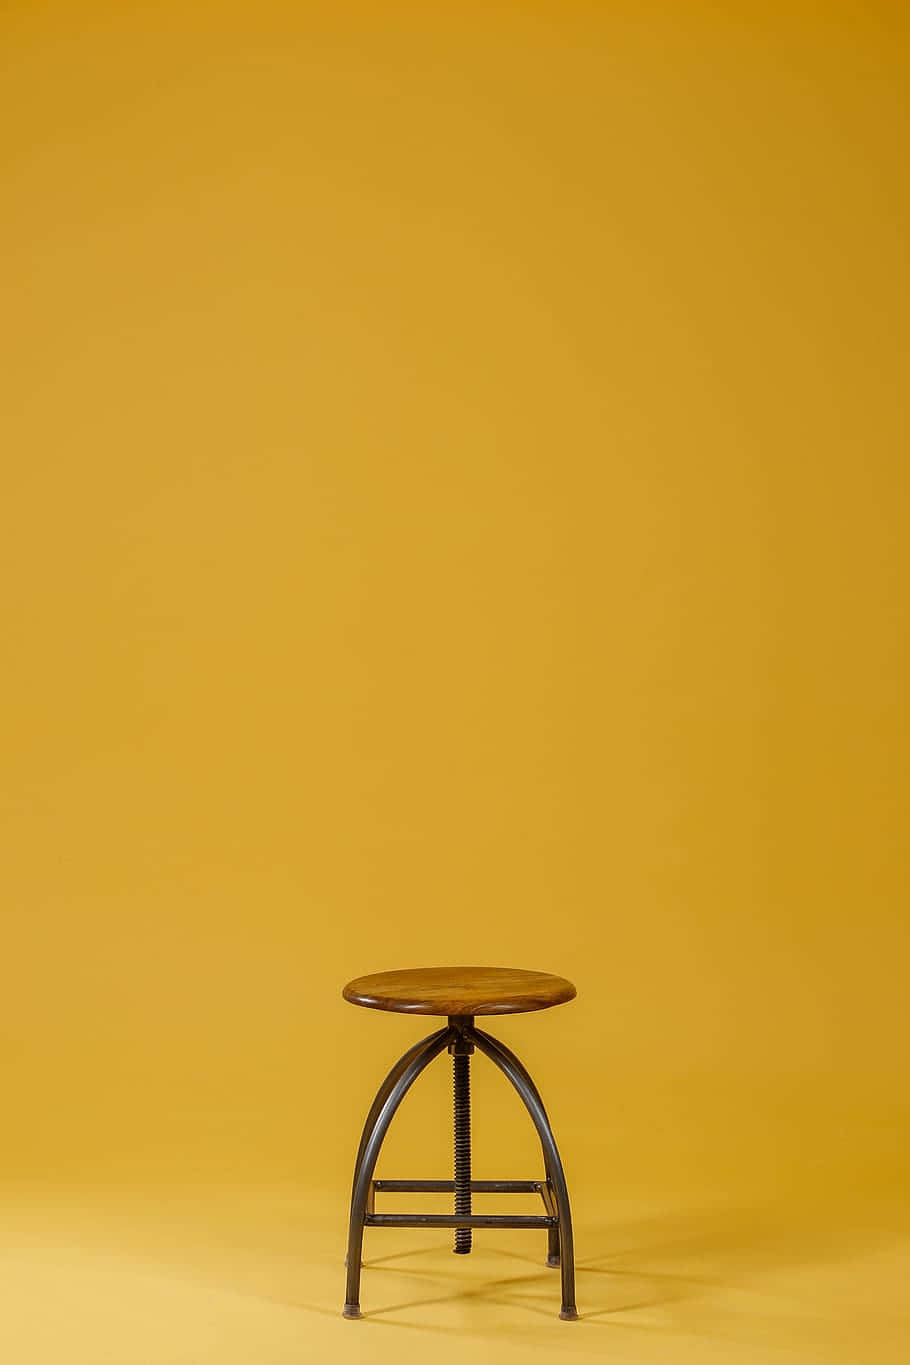 Caption: Aesthetic Wooden Stool Chair Background